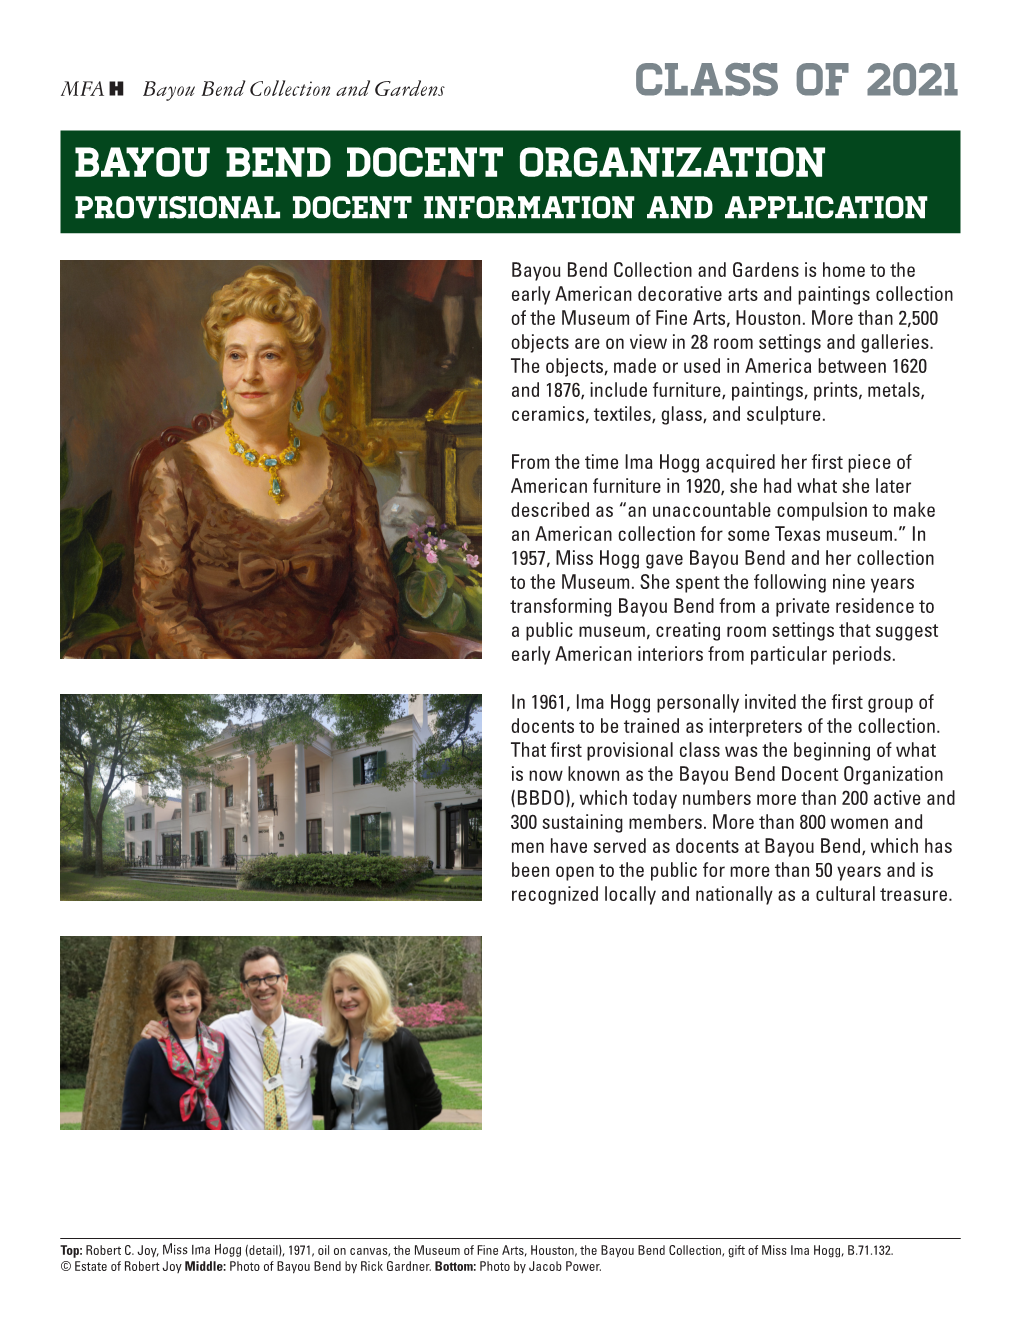 Class of 2021 Bayou Bend Docent Organization Provisional Docent Information and Application